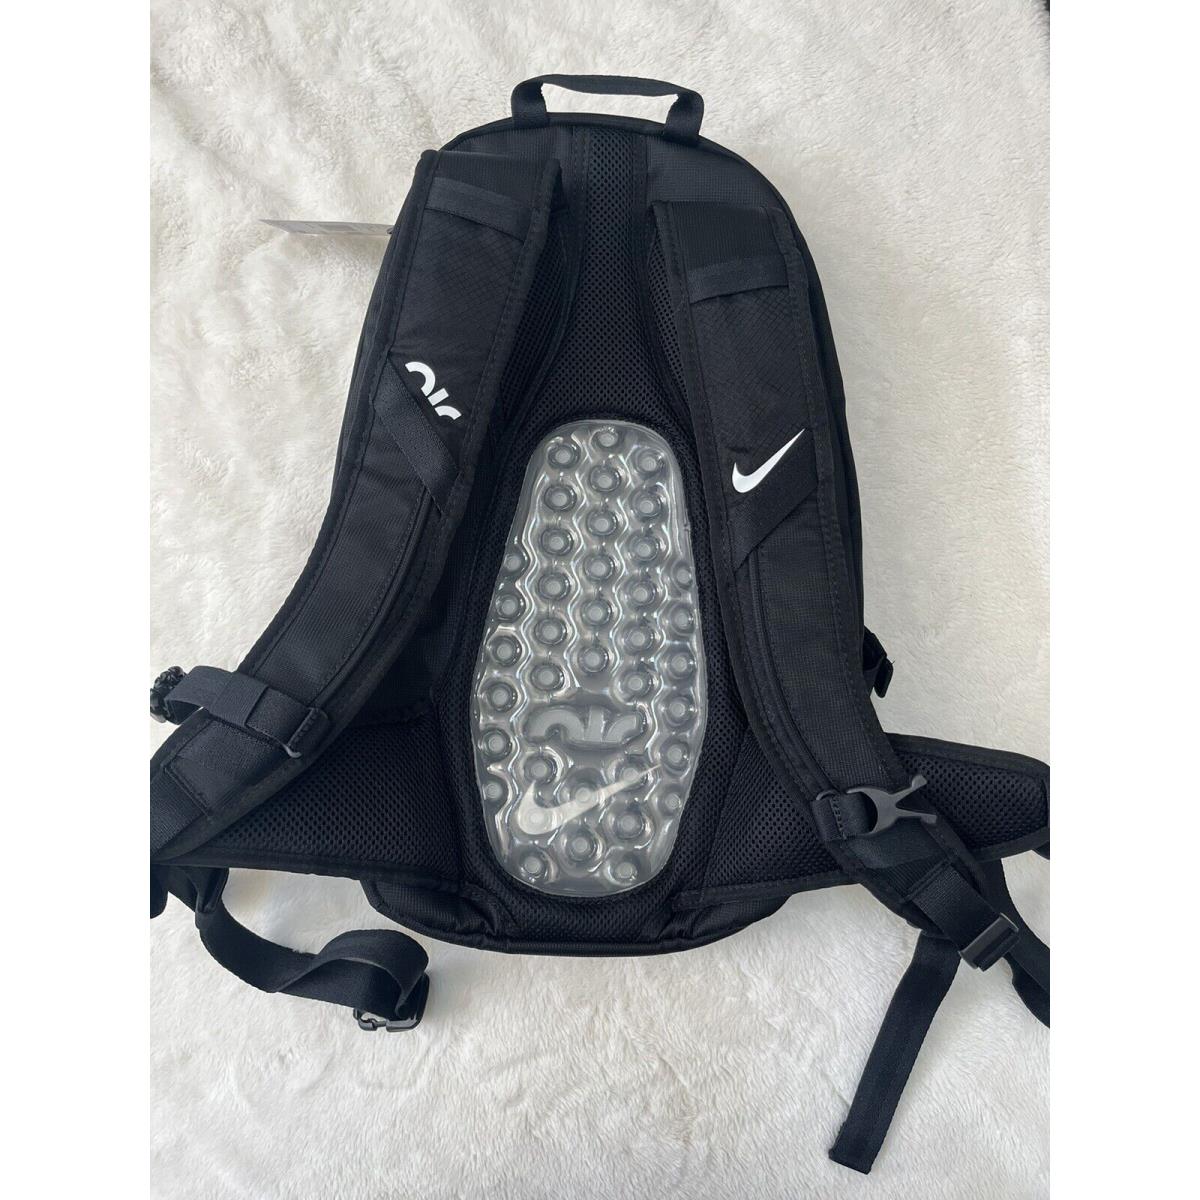 Nike Air Max Bubble Backpack School Black White 17L Style FN3533-010